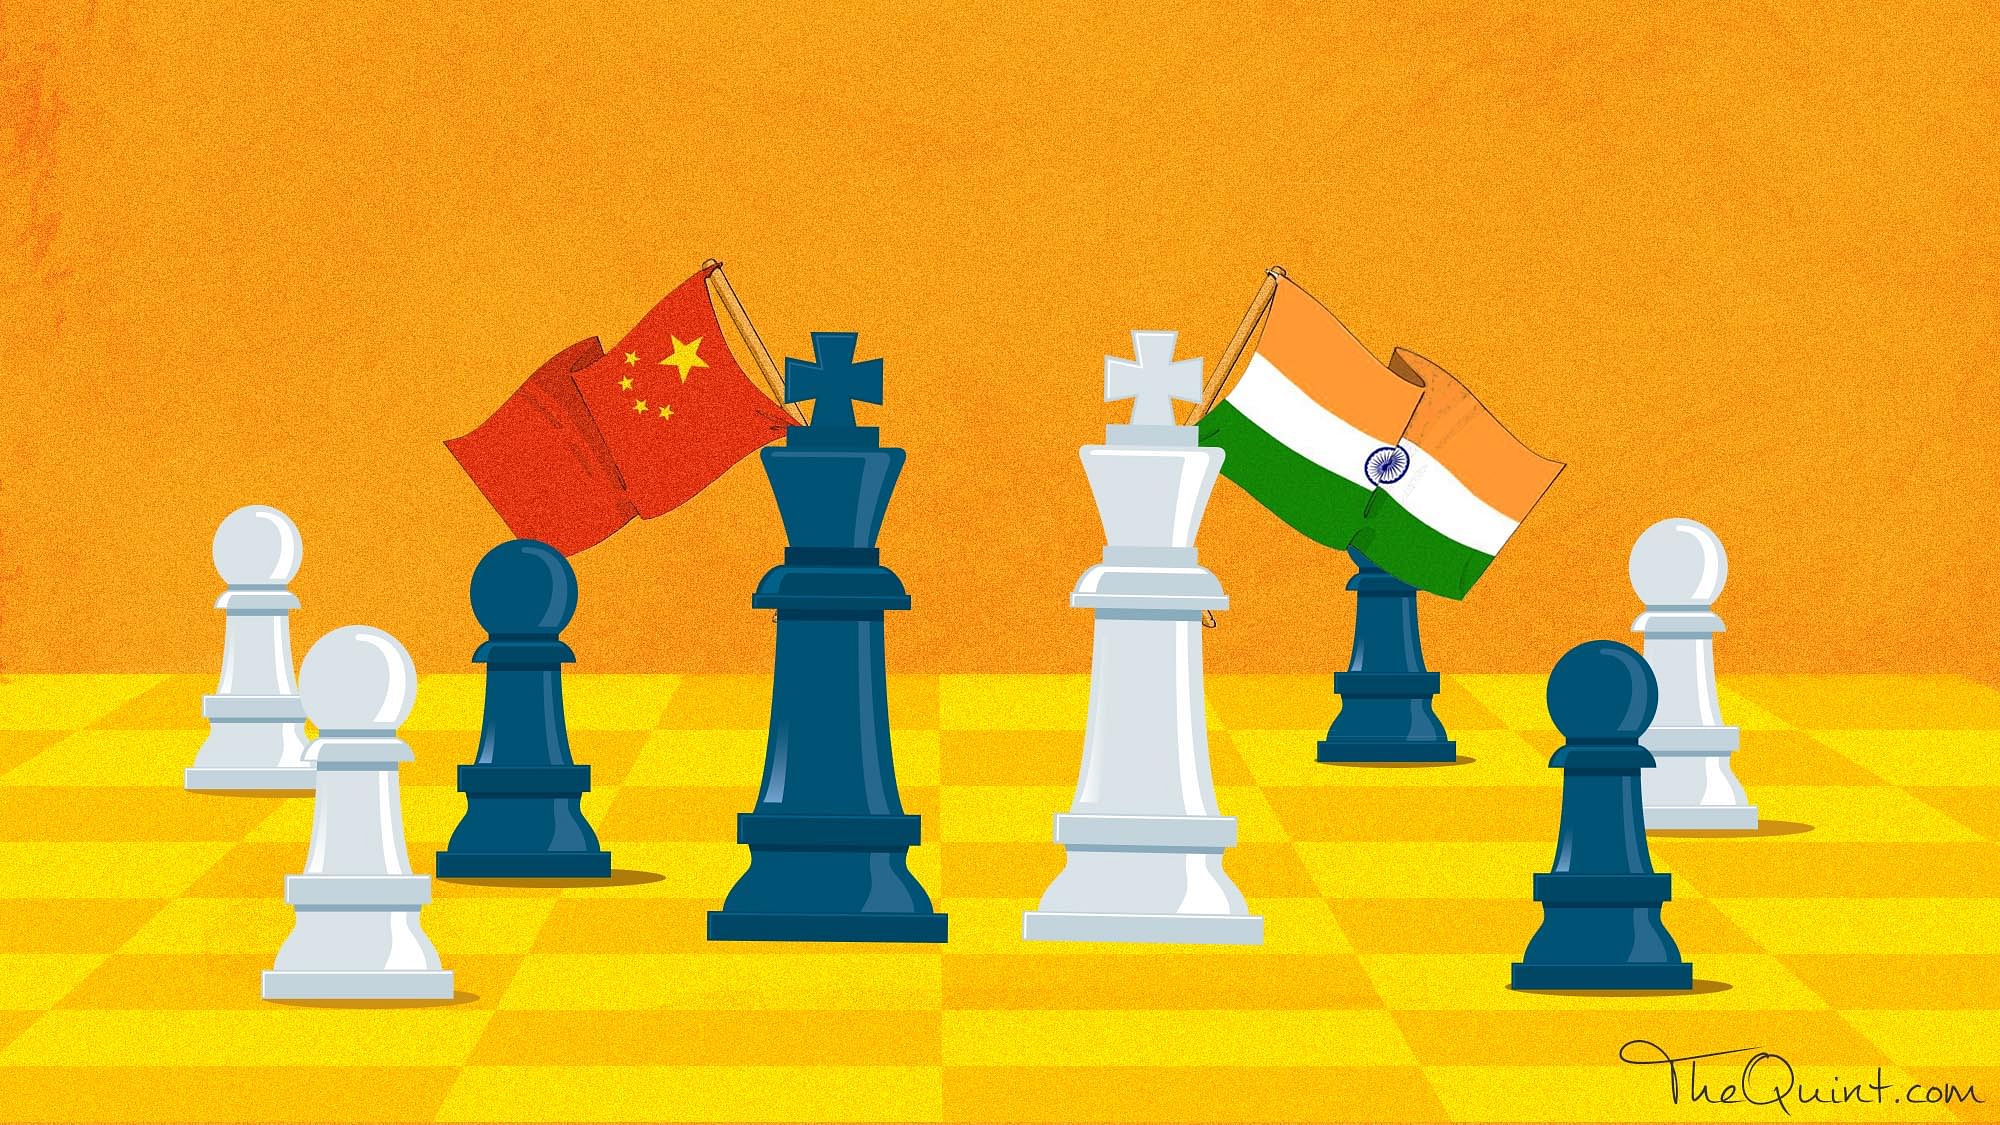 

The Chinese counterpart of ‘shatranj’ is the game of “wei-qui”, based on “surrounding pieces” and “strategic encirclement”.